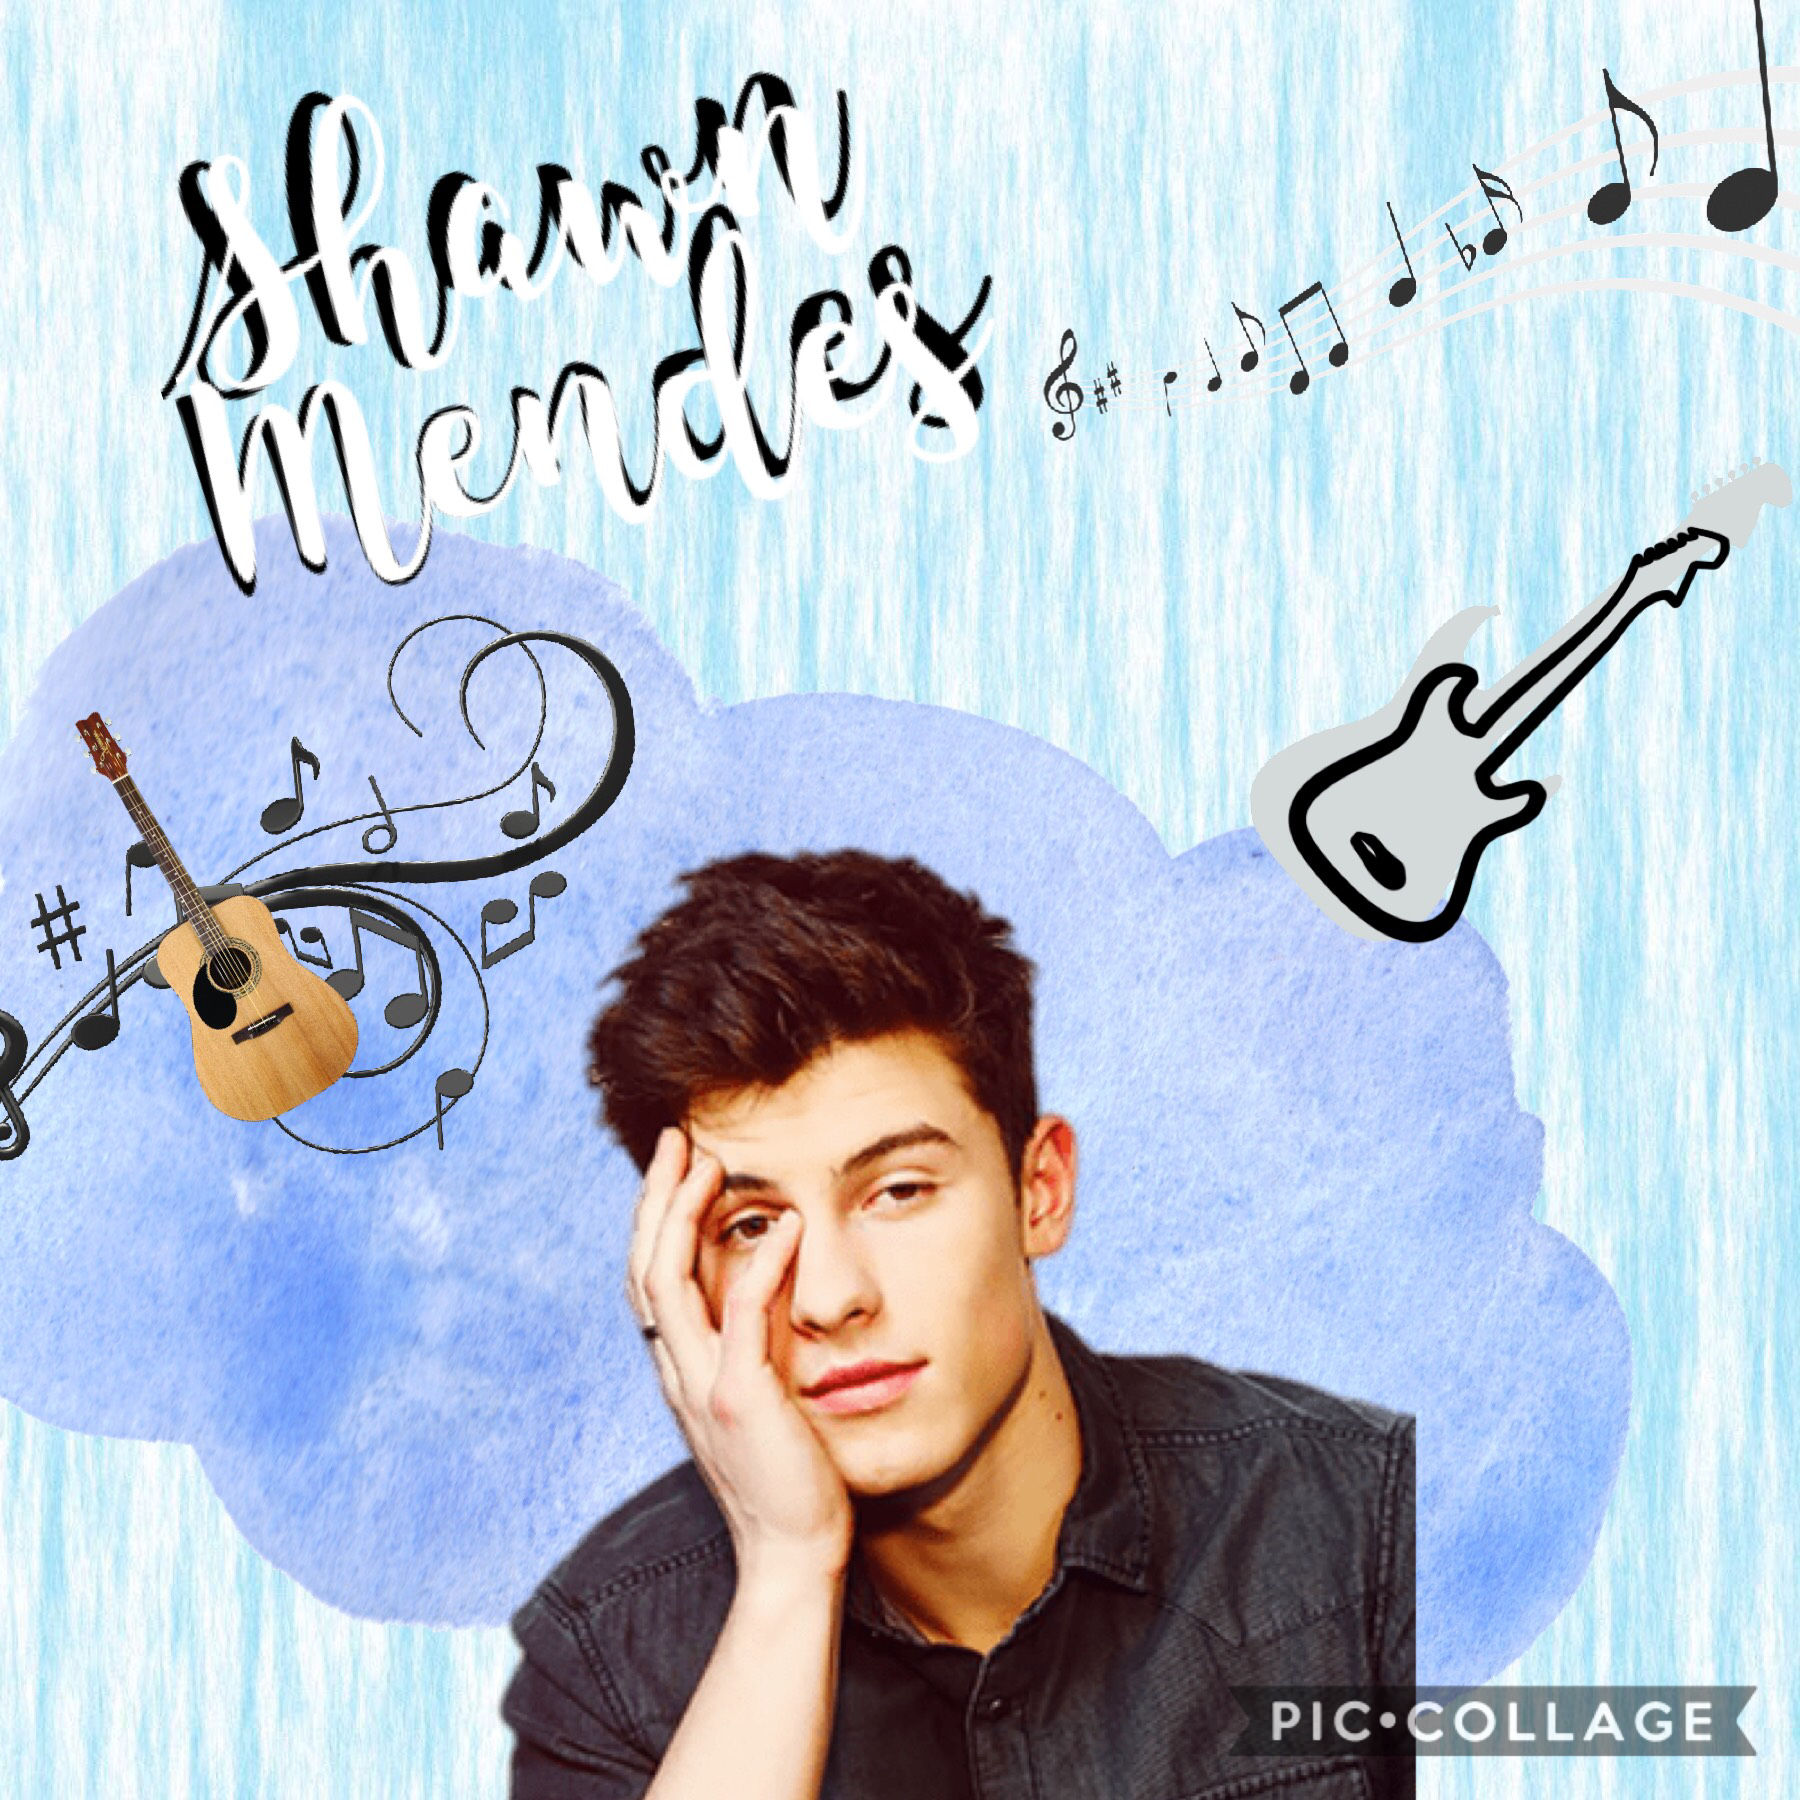 🎤TAP🎤
I loveee Shawn so I made this 💓💓